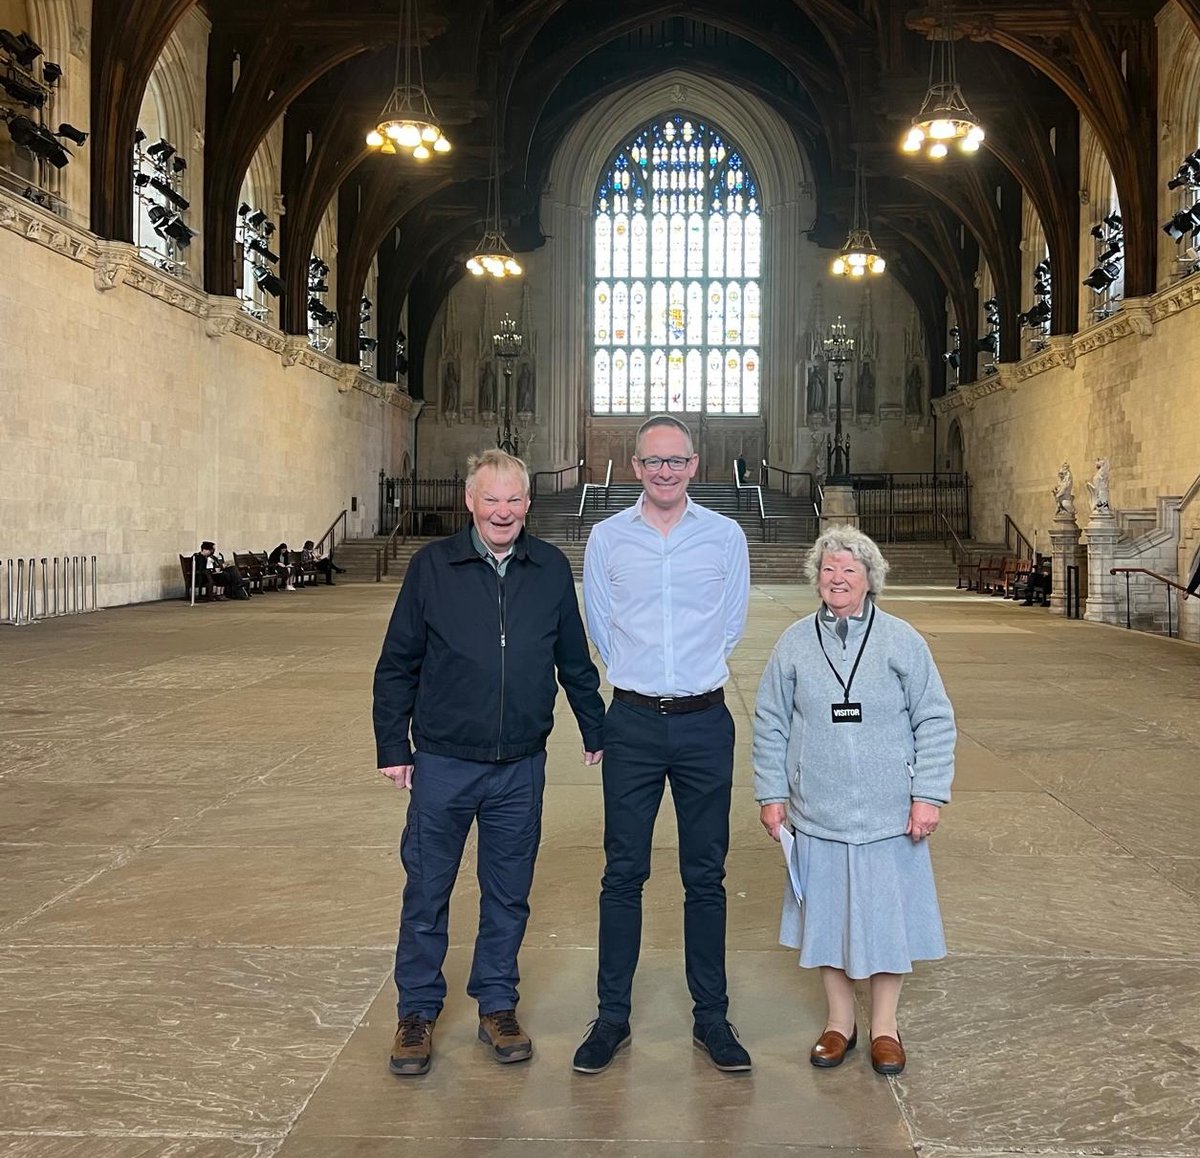 🤝 Lovely to welcome Denholm residents, John and Doreen, to Parliament this morning. If you are visiting from the #ScottishBorders and would like a tour of Westminster, don't hesitate to contact me at john.lamont.mp@parliament.uk 📩